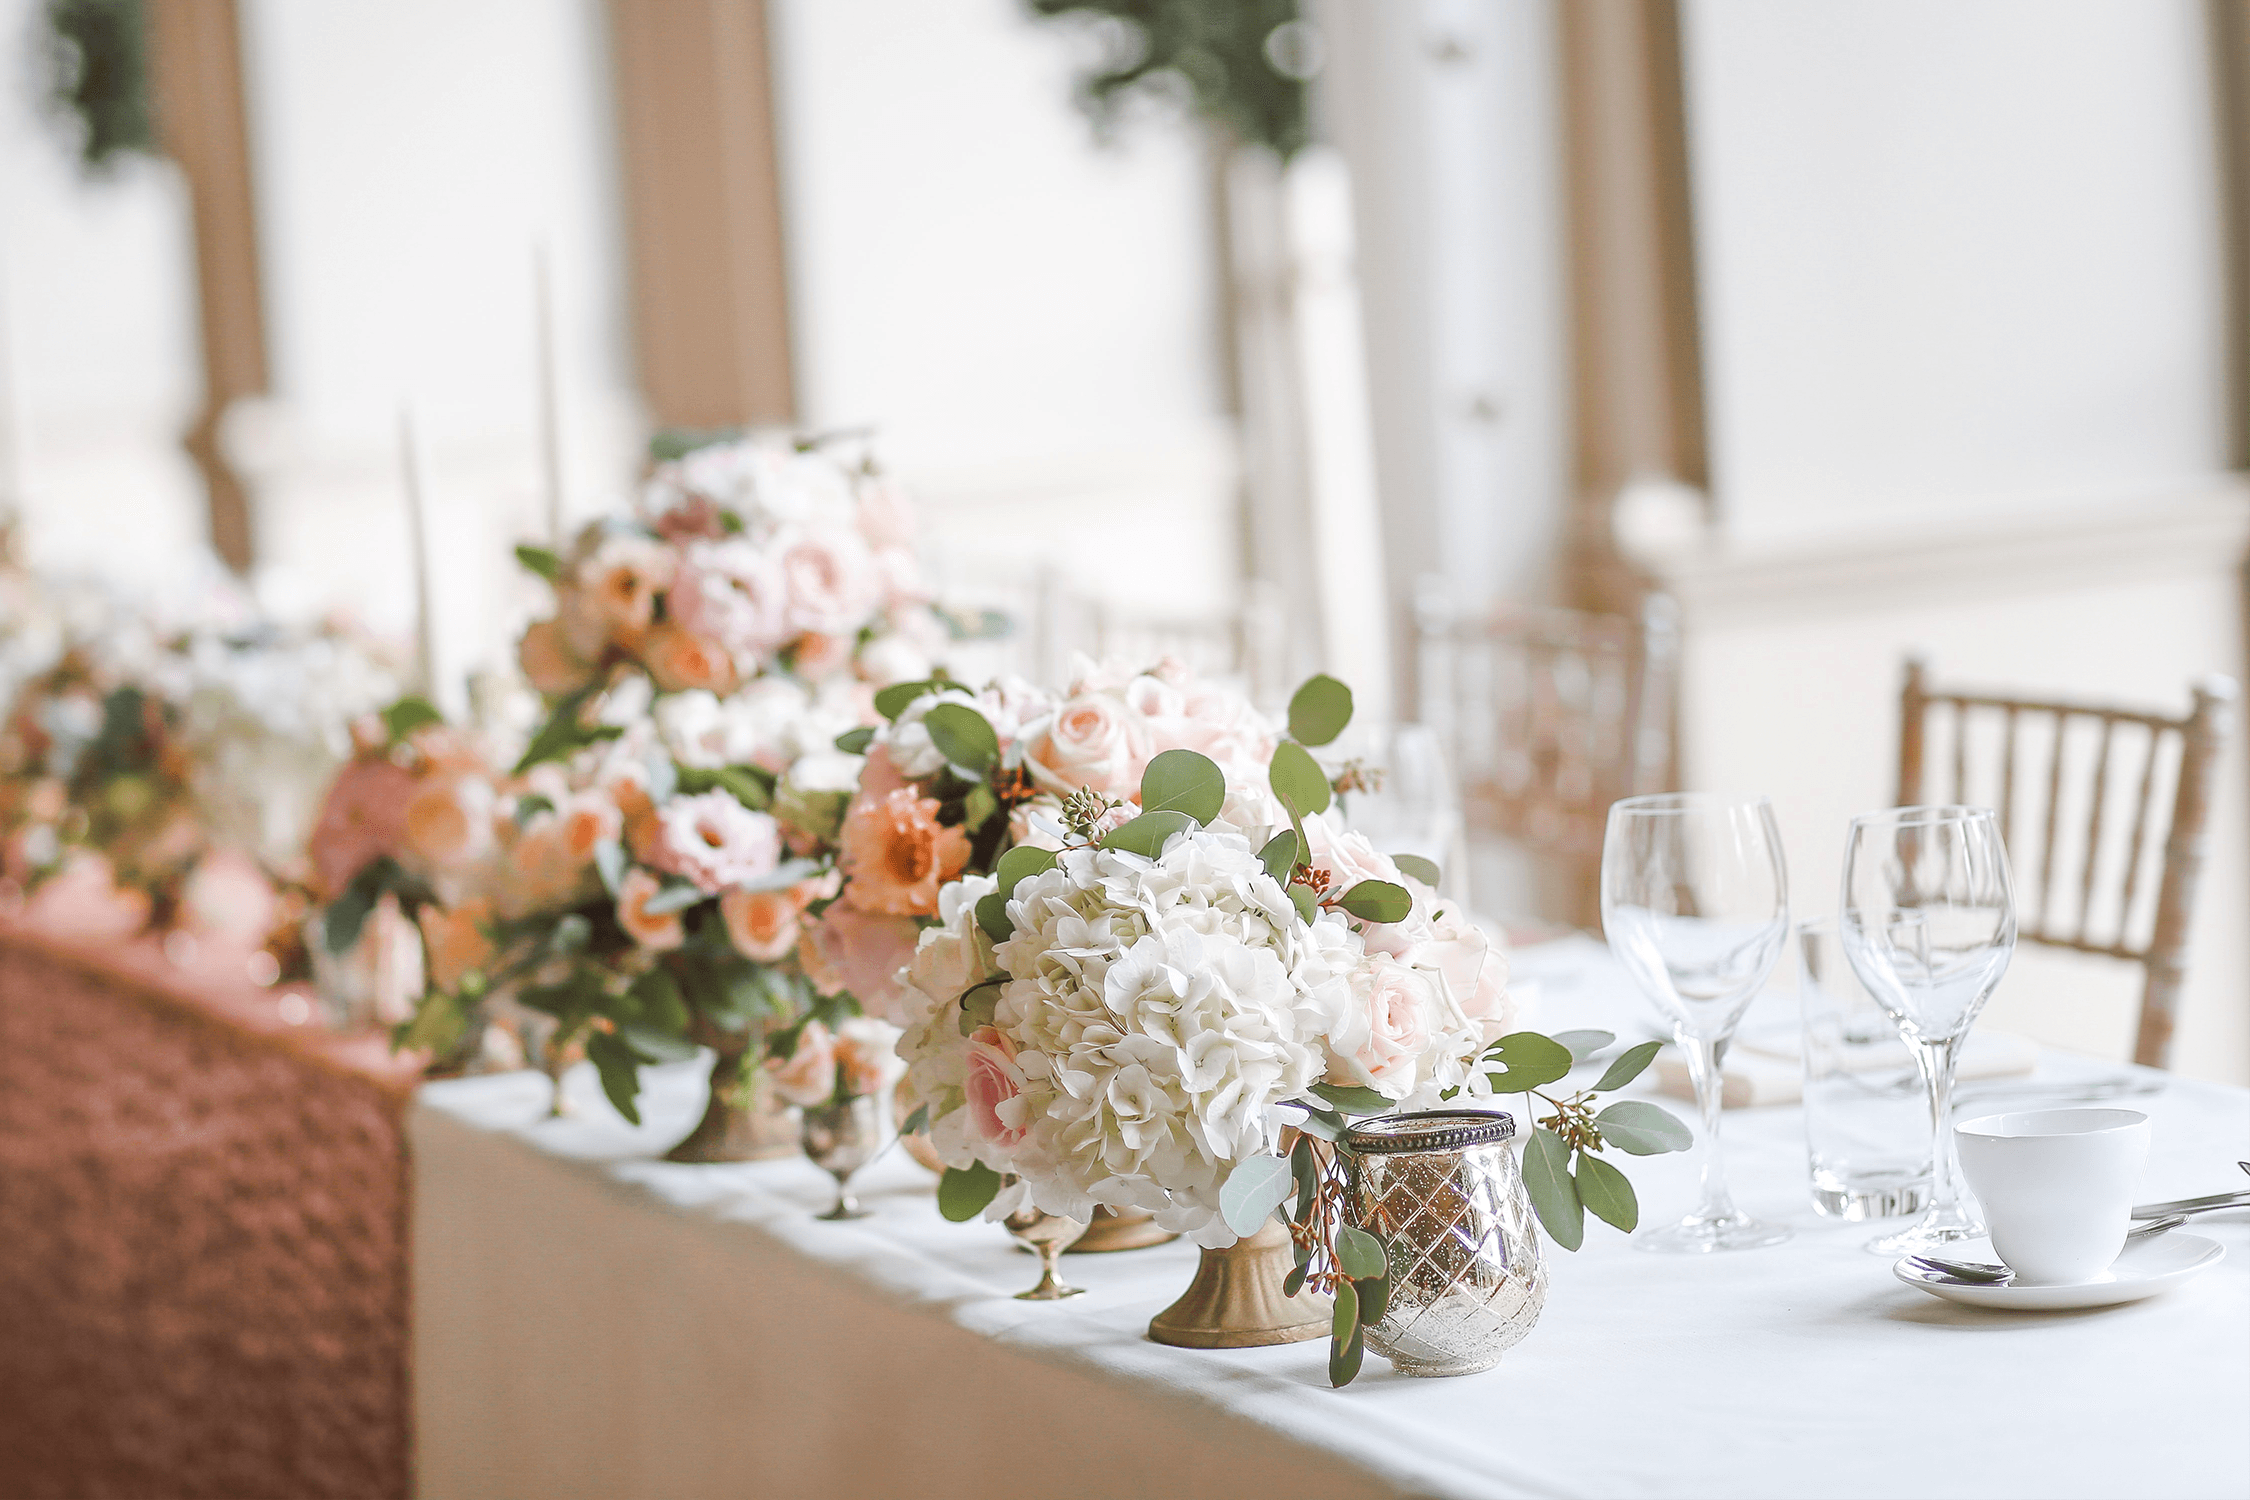 The head table at a wedding with white and pink flowers